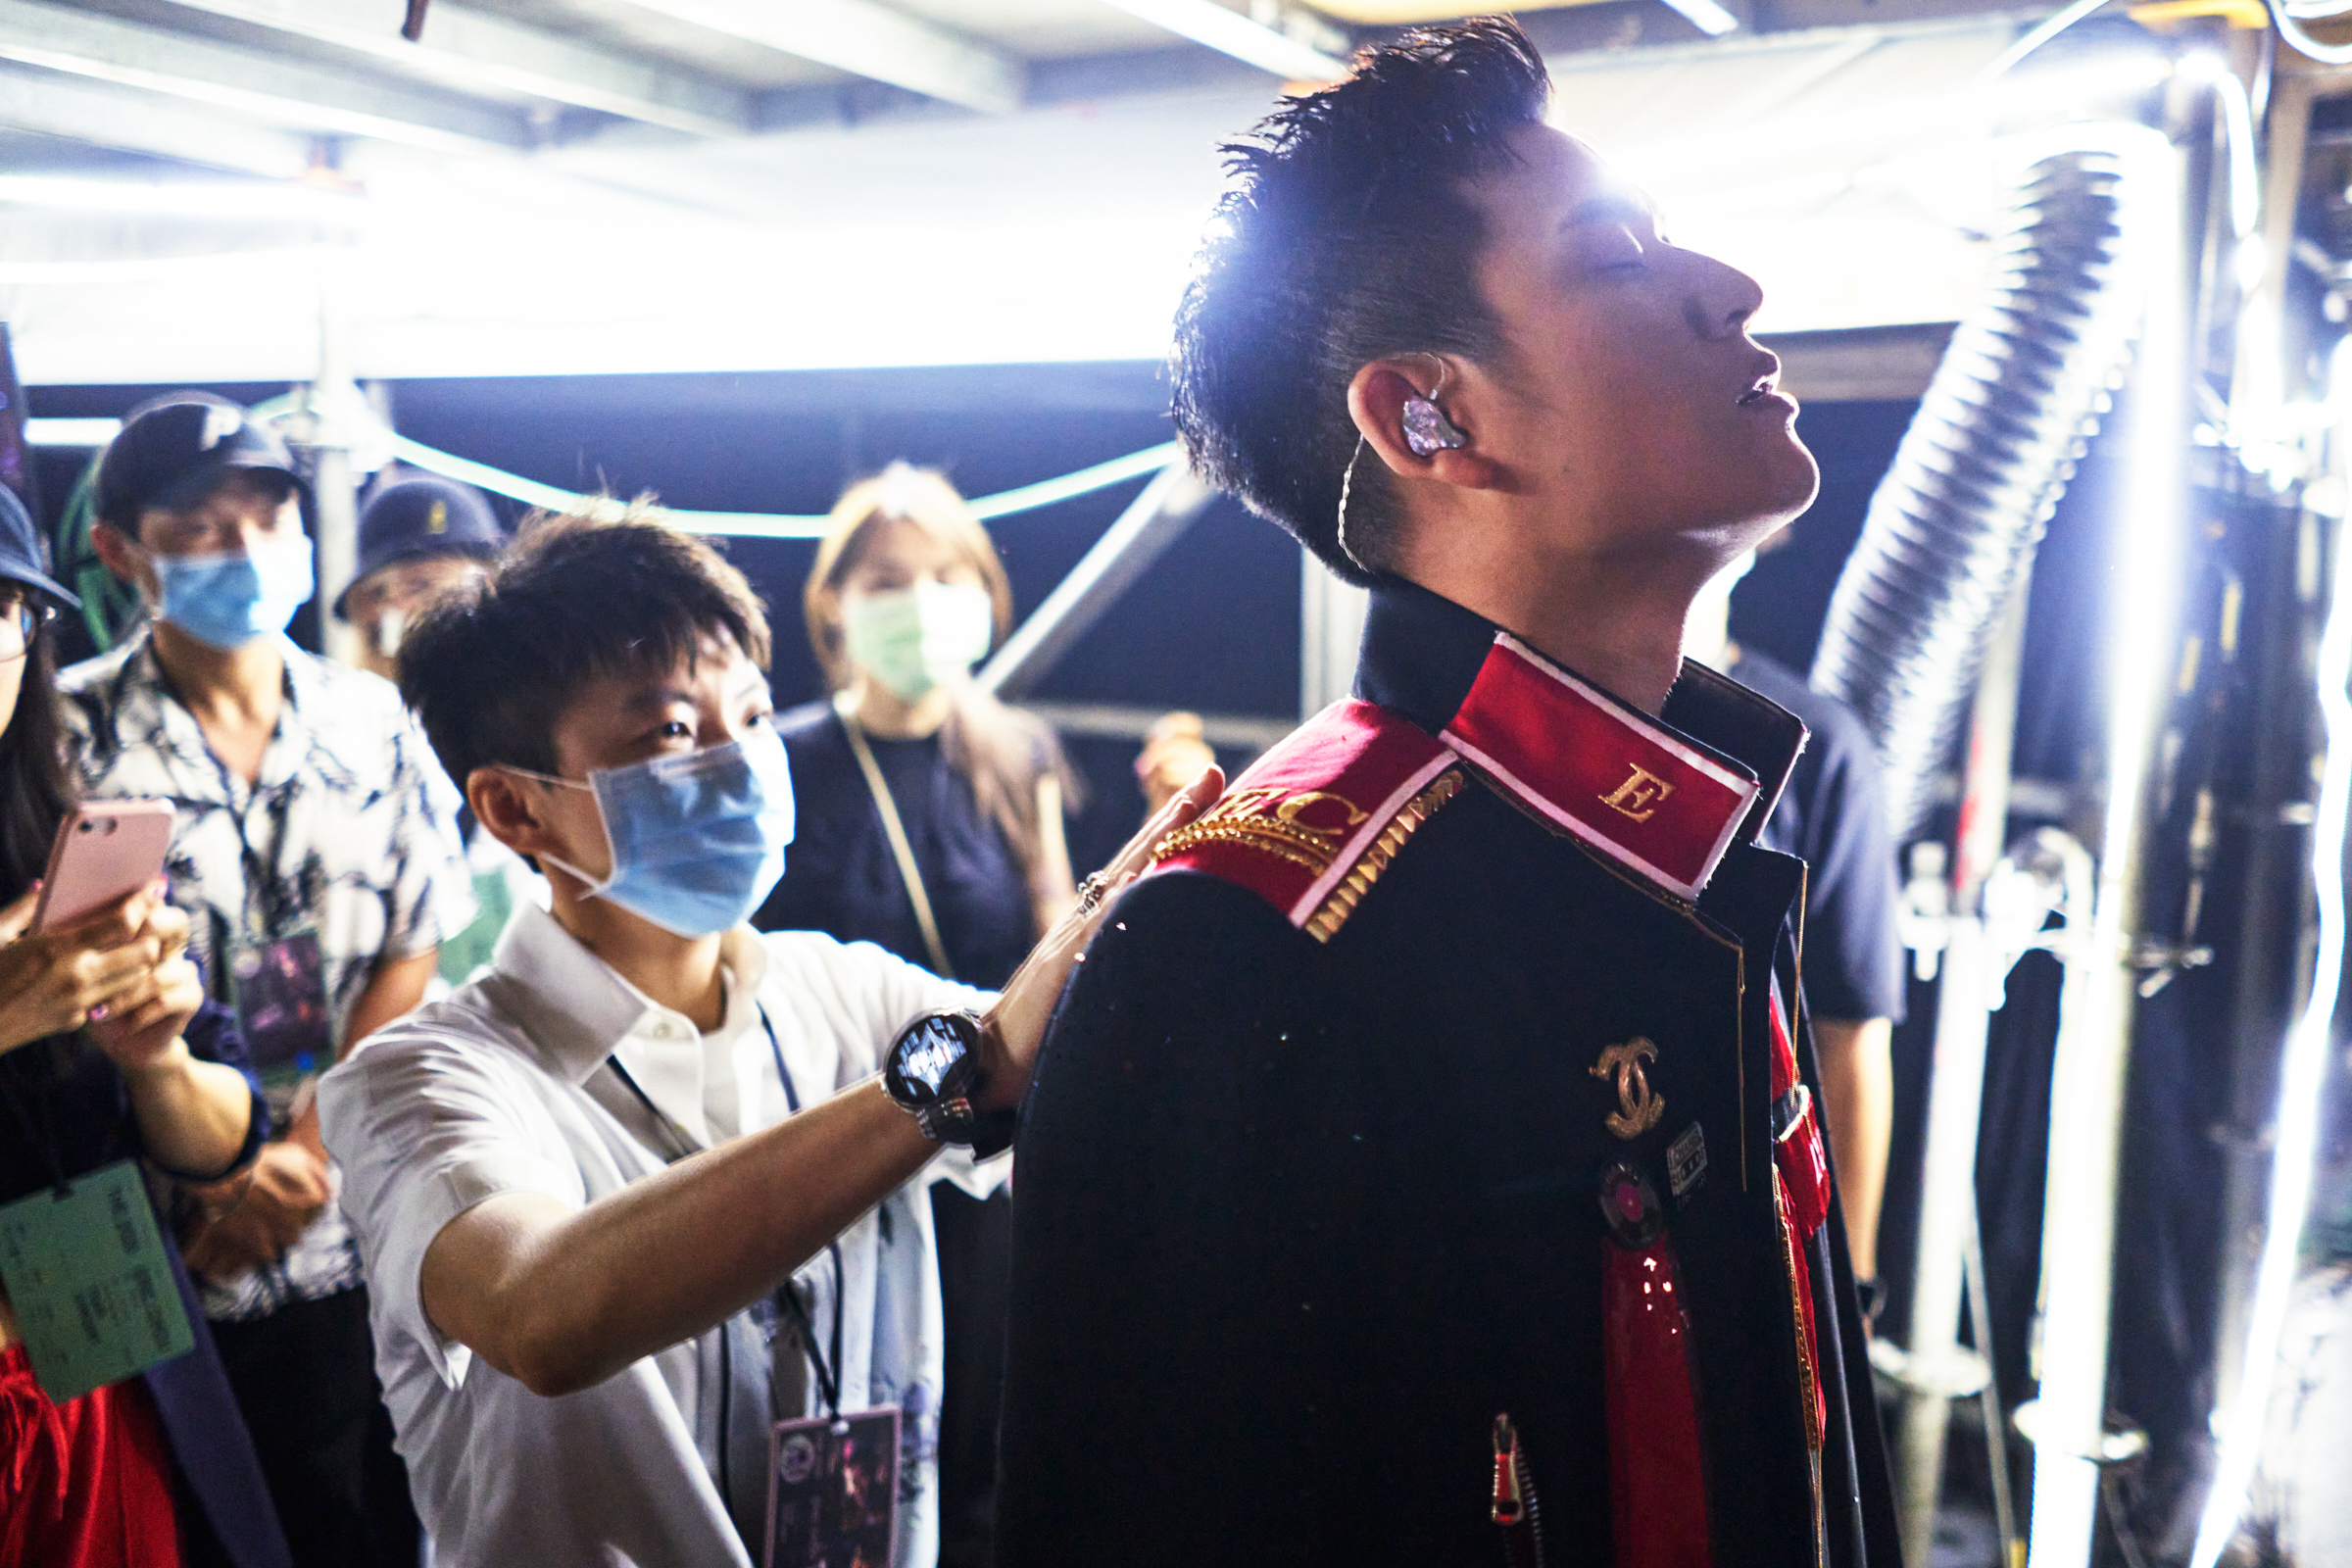 Chou receives finishing touches from his manager Reese Hsu before going onstage